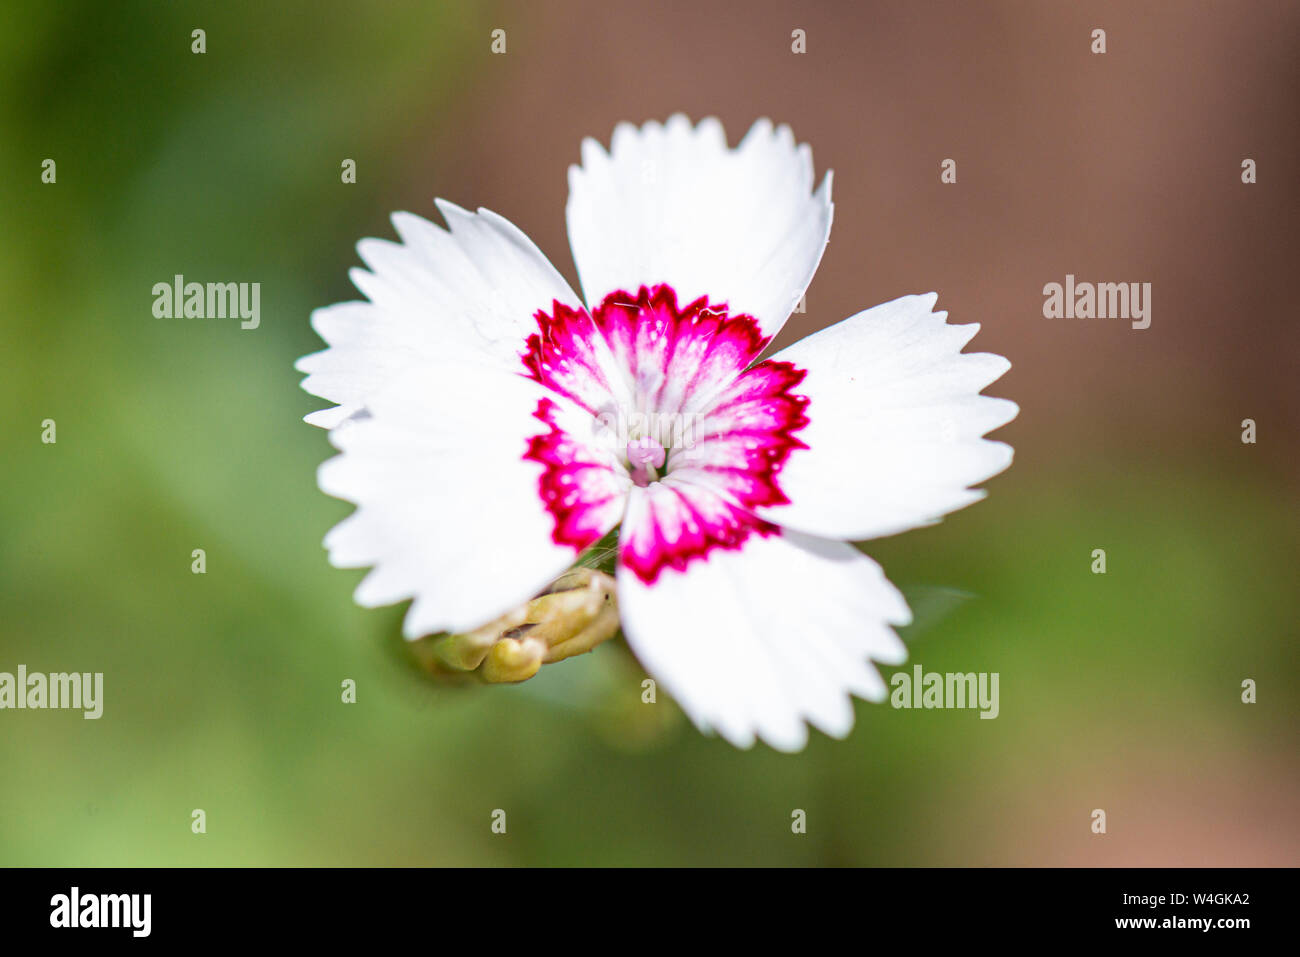 A close up of the flower of a Dianthus deltoides 'Arctic Fire Stock Photo